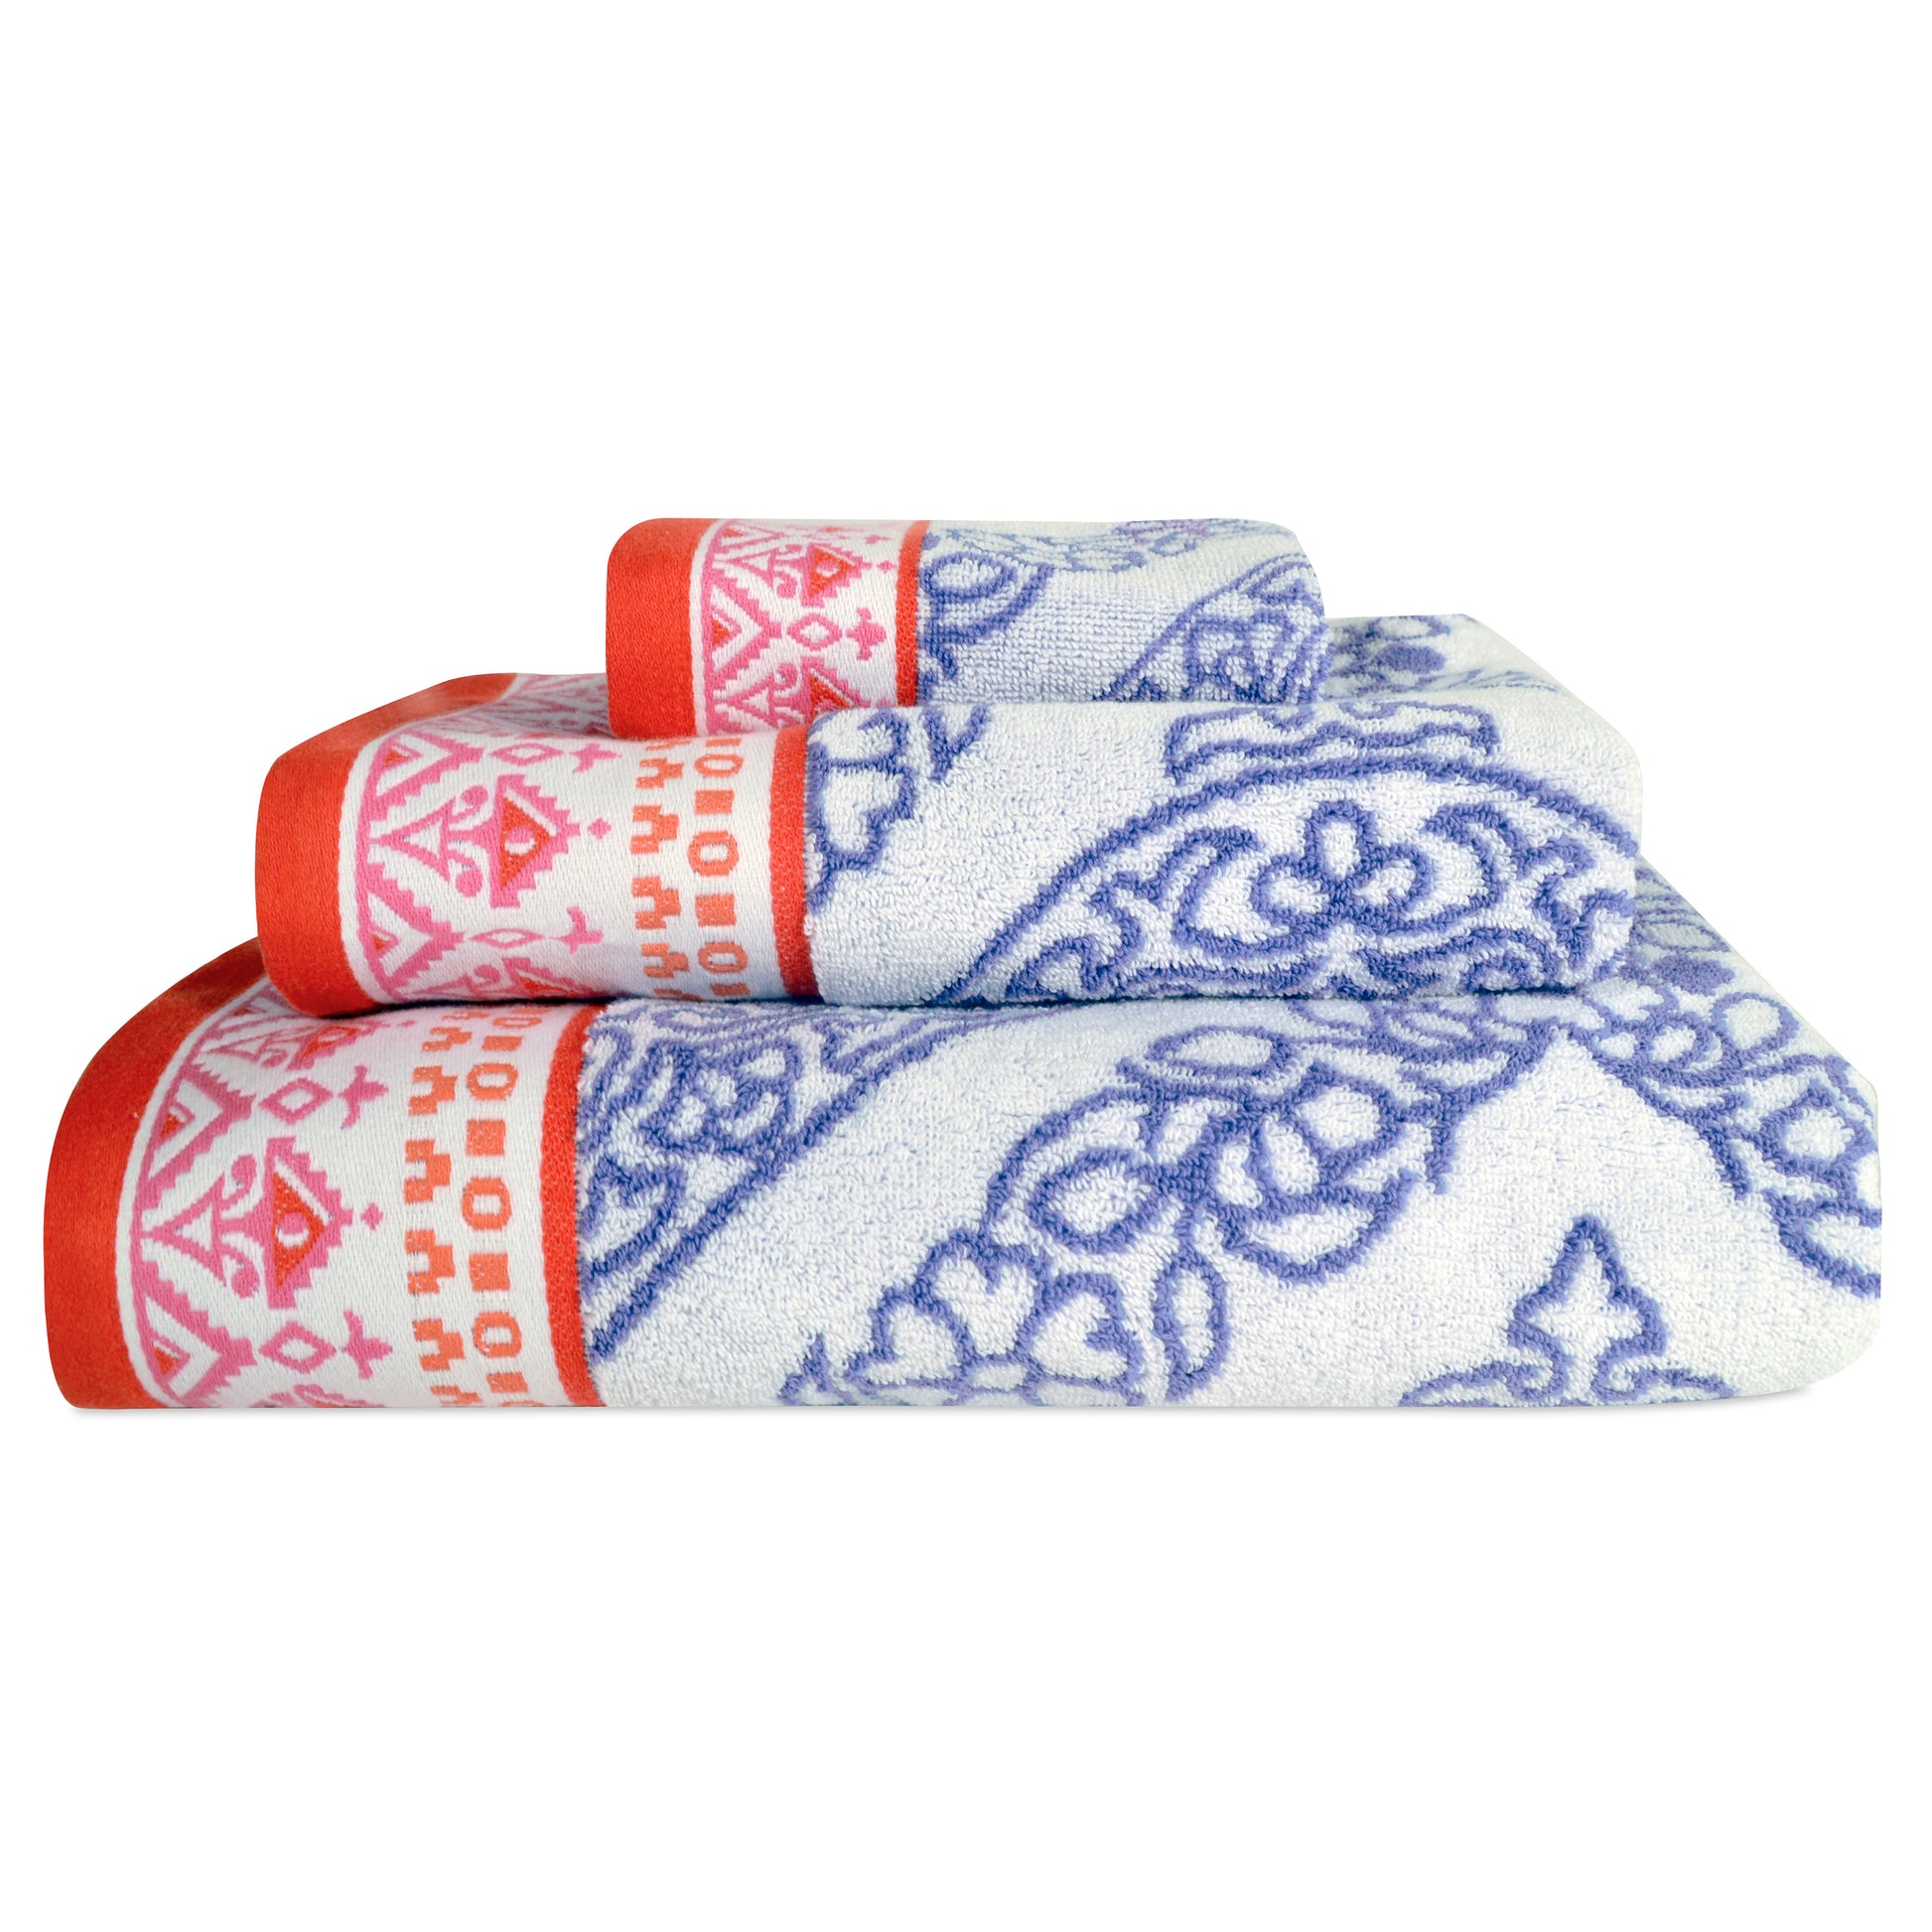 John Robshaw Mitta Periwinkle Towel Collection